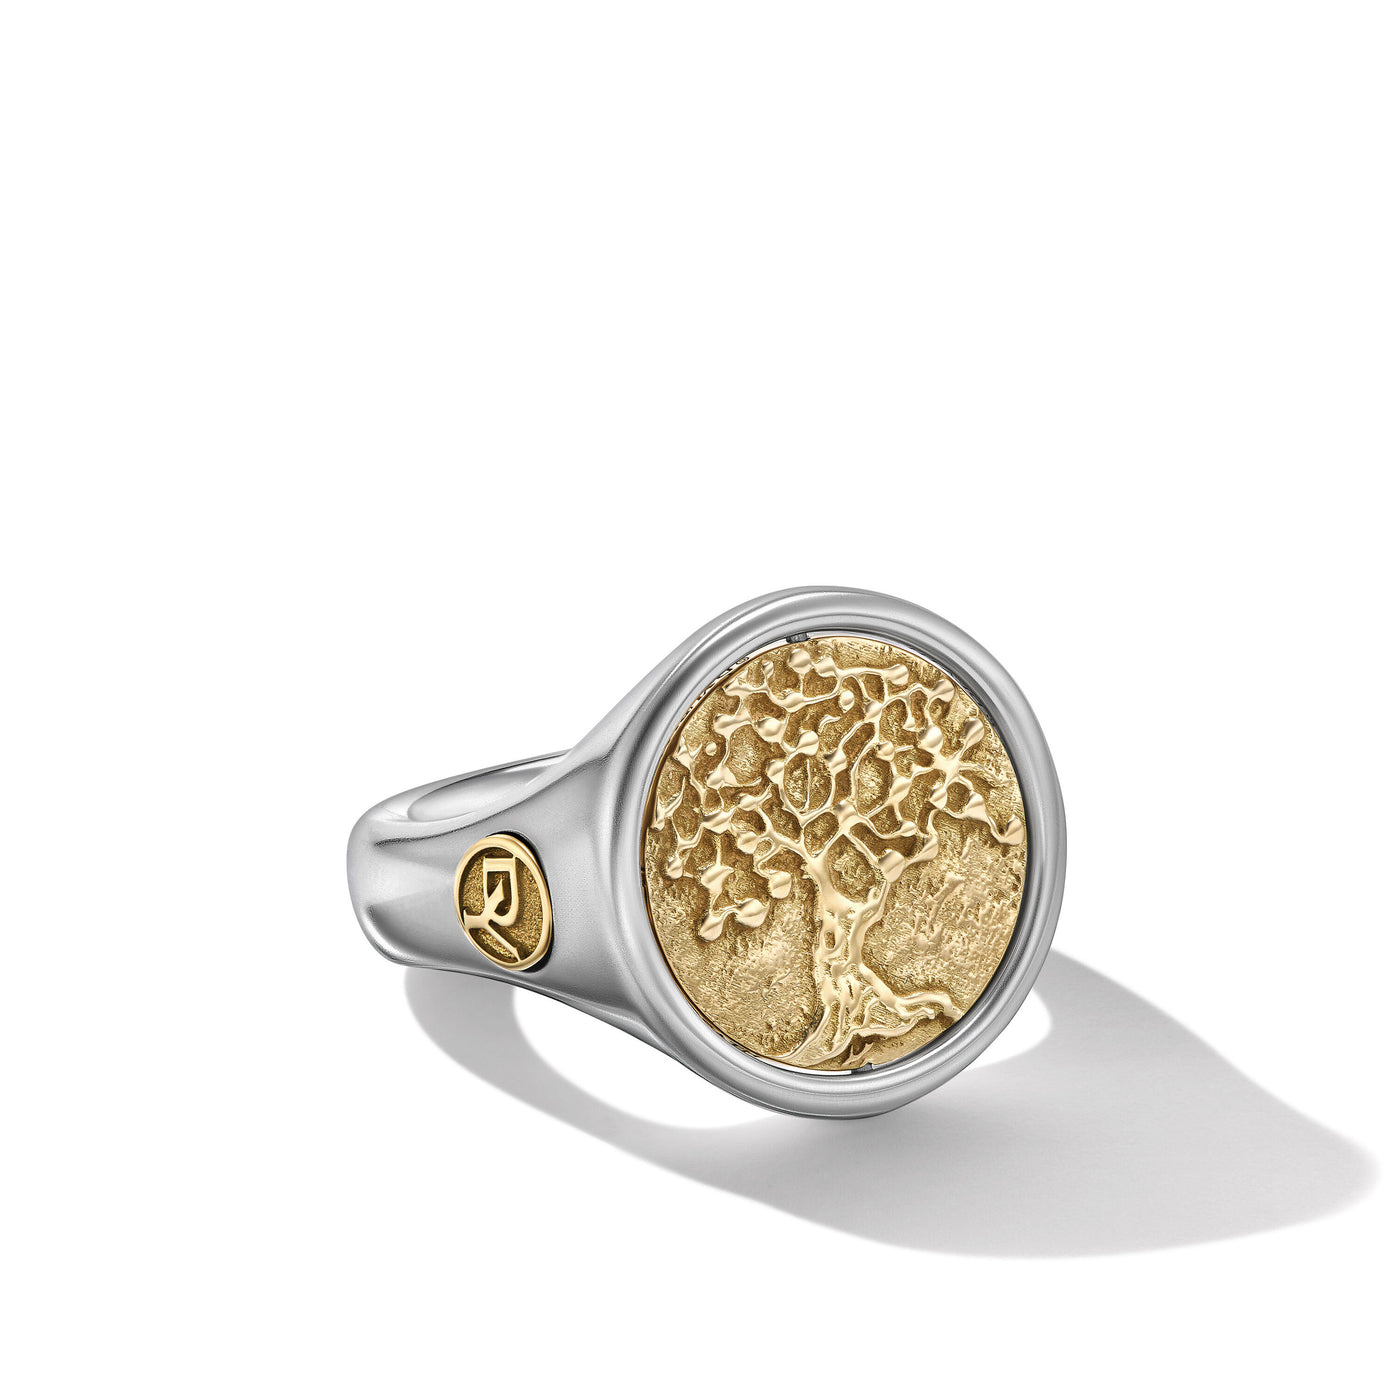 Life and Death Duality Signet Ring in Sterling Silver with 18K Yellow Gold\, 20mm